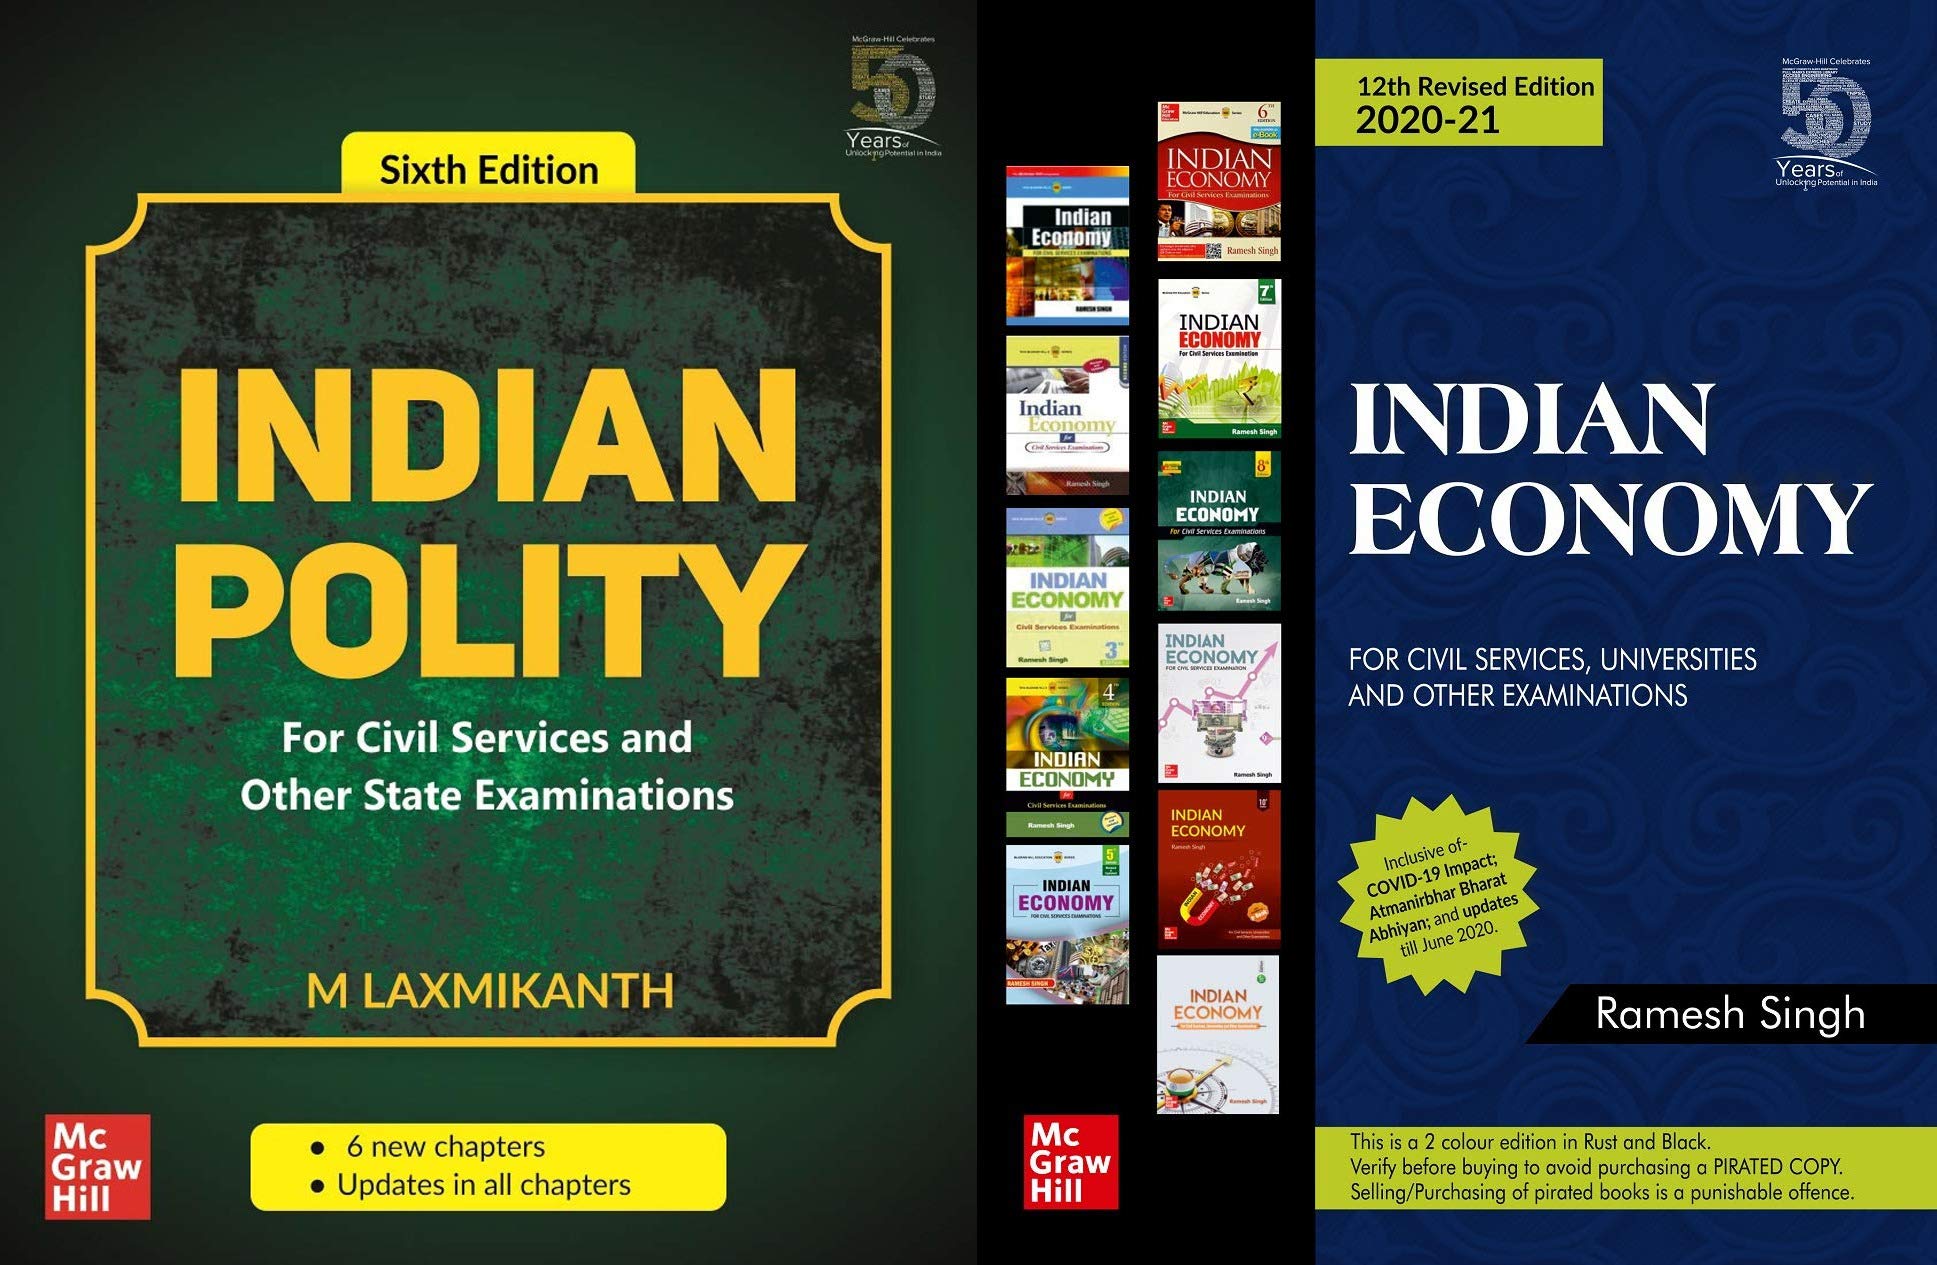 INDIAN POLITY and INDIAN ECONOMY